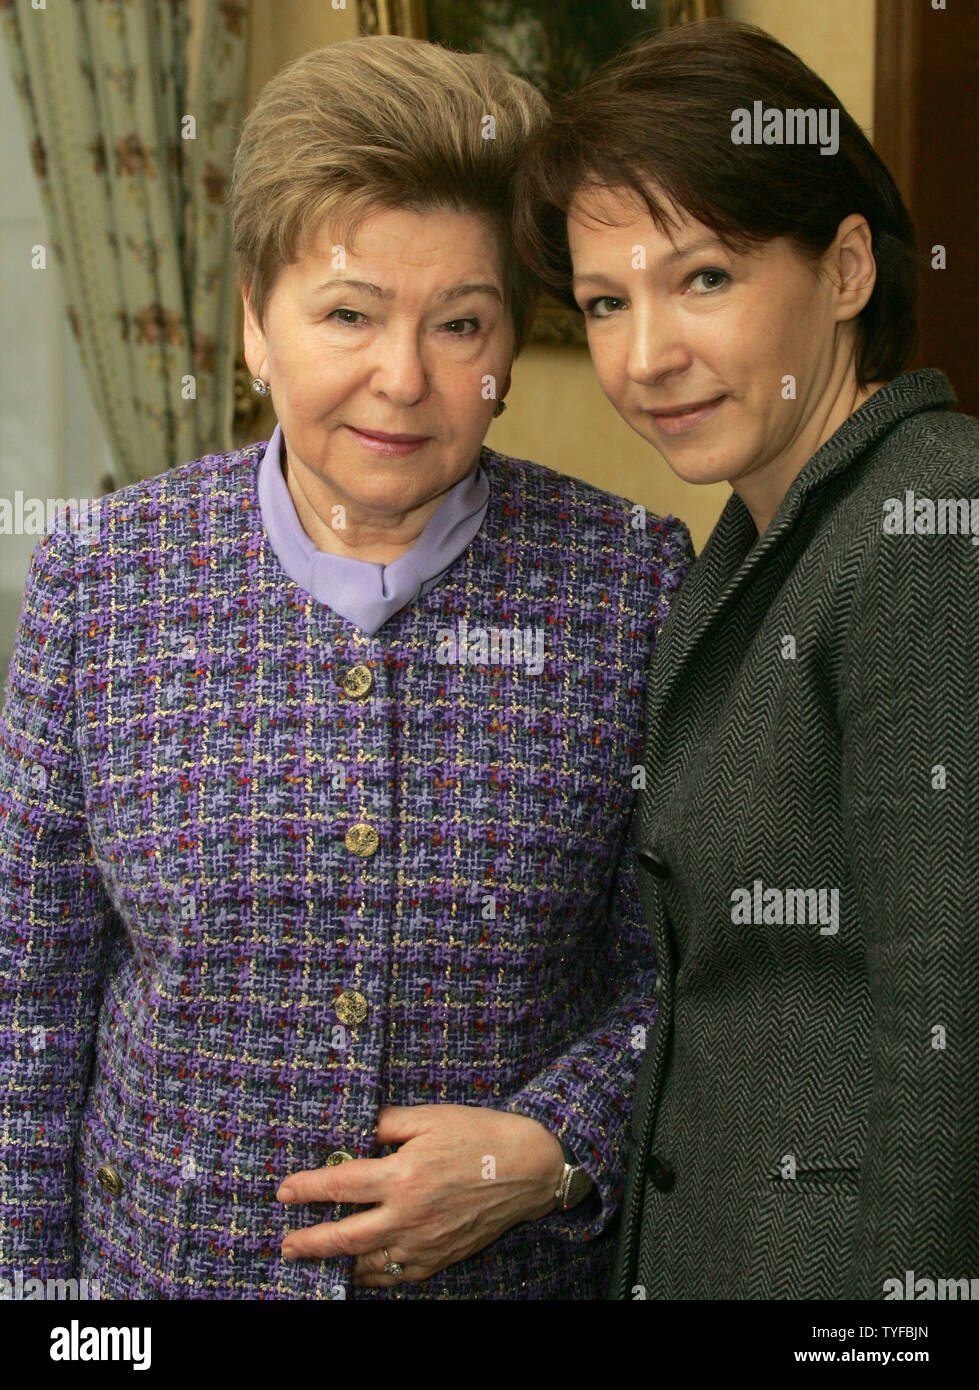 In this file photo, former President Boris Yeltsin's wife Naina (L) and daughter Tatyana Dyachenko pose at their residence in Barvikha, the most presitigious and expensive suburb of Moscow  on January 30, 2006. Yeltsin died at the age of 76 on April 23, 2007 in Moscow. Yeltsin pushed Russia to democracy and a market economy after helping in the collapse of the Soviet Union communist state in 1991. (UPI Photo/Anatoli Zhdanov) Stock Photo